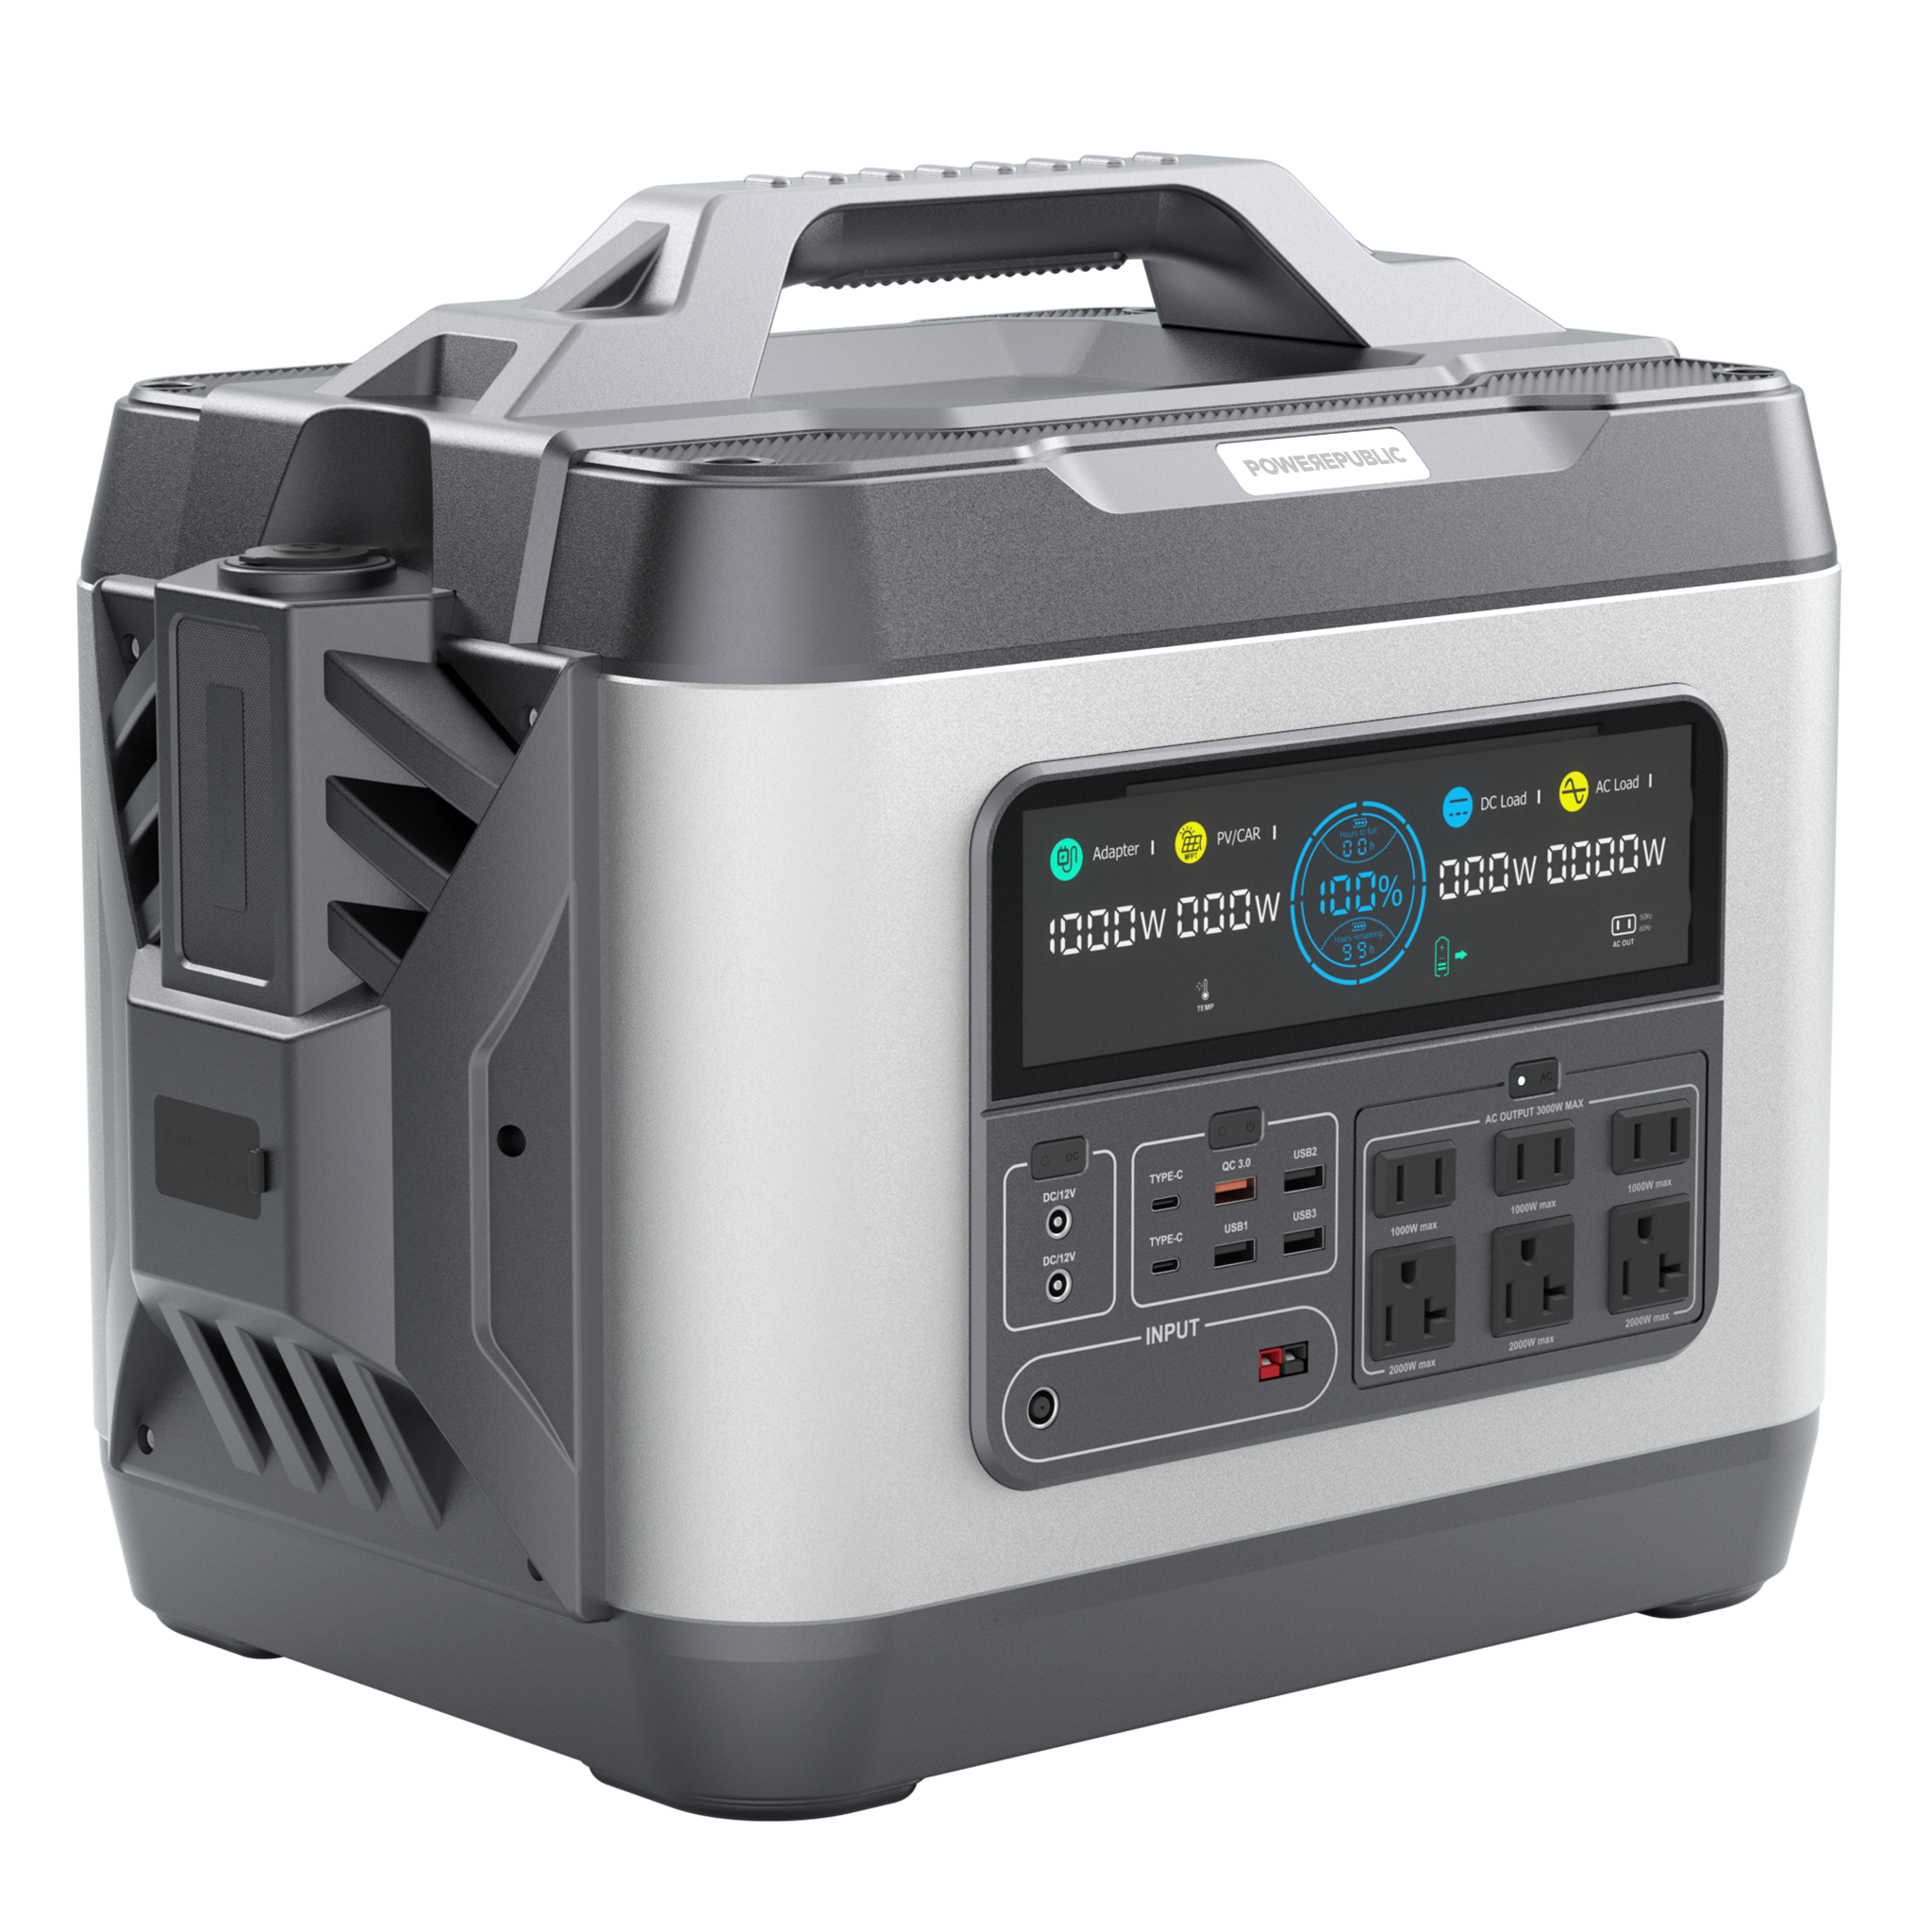 POWEREPUBLIC T3000 portable power station, 3000W 3200Wh, metallic gray aluminum-alloy body with aircraft wing design, a handle, an LCD screen, and input and output ports.